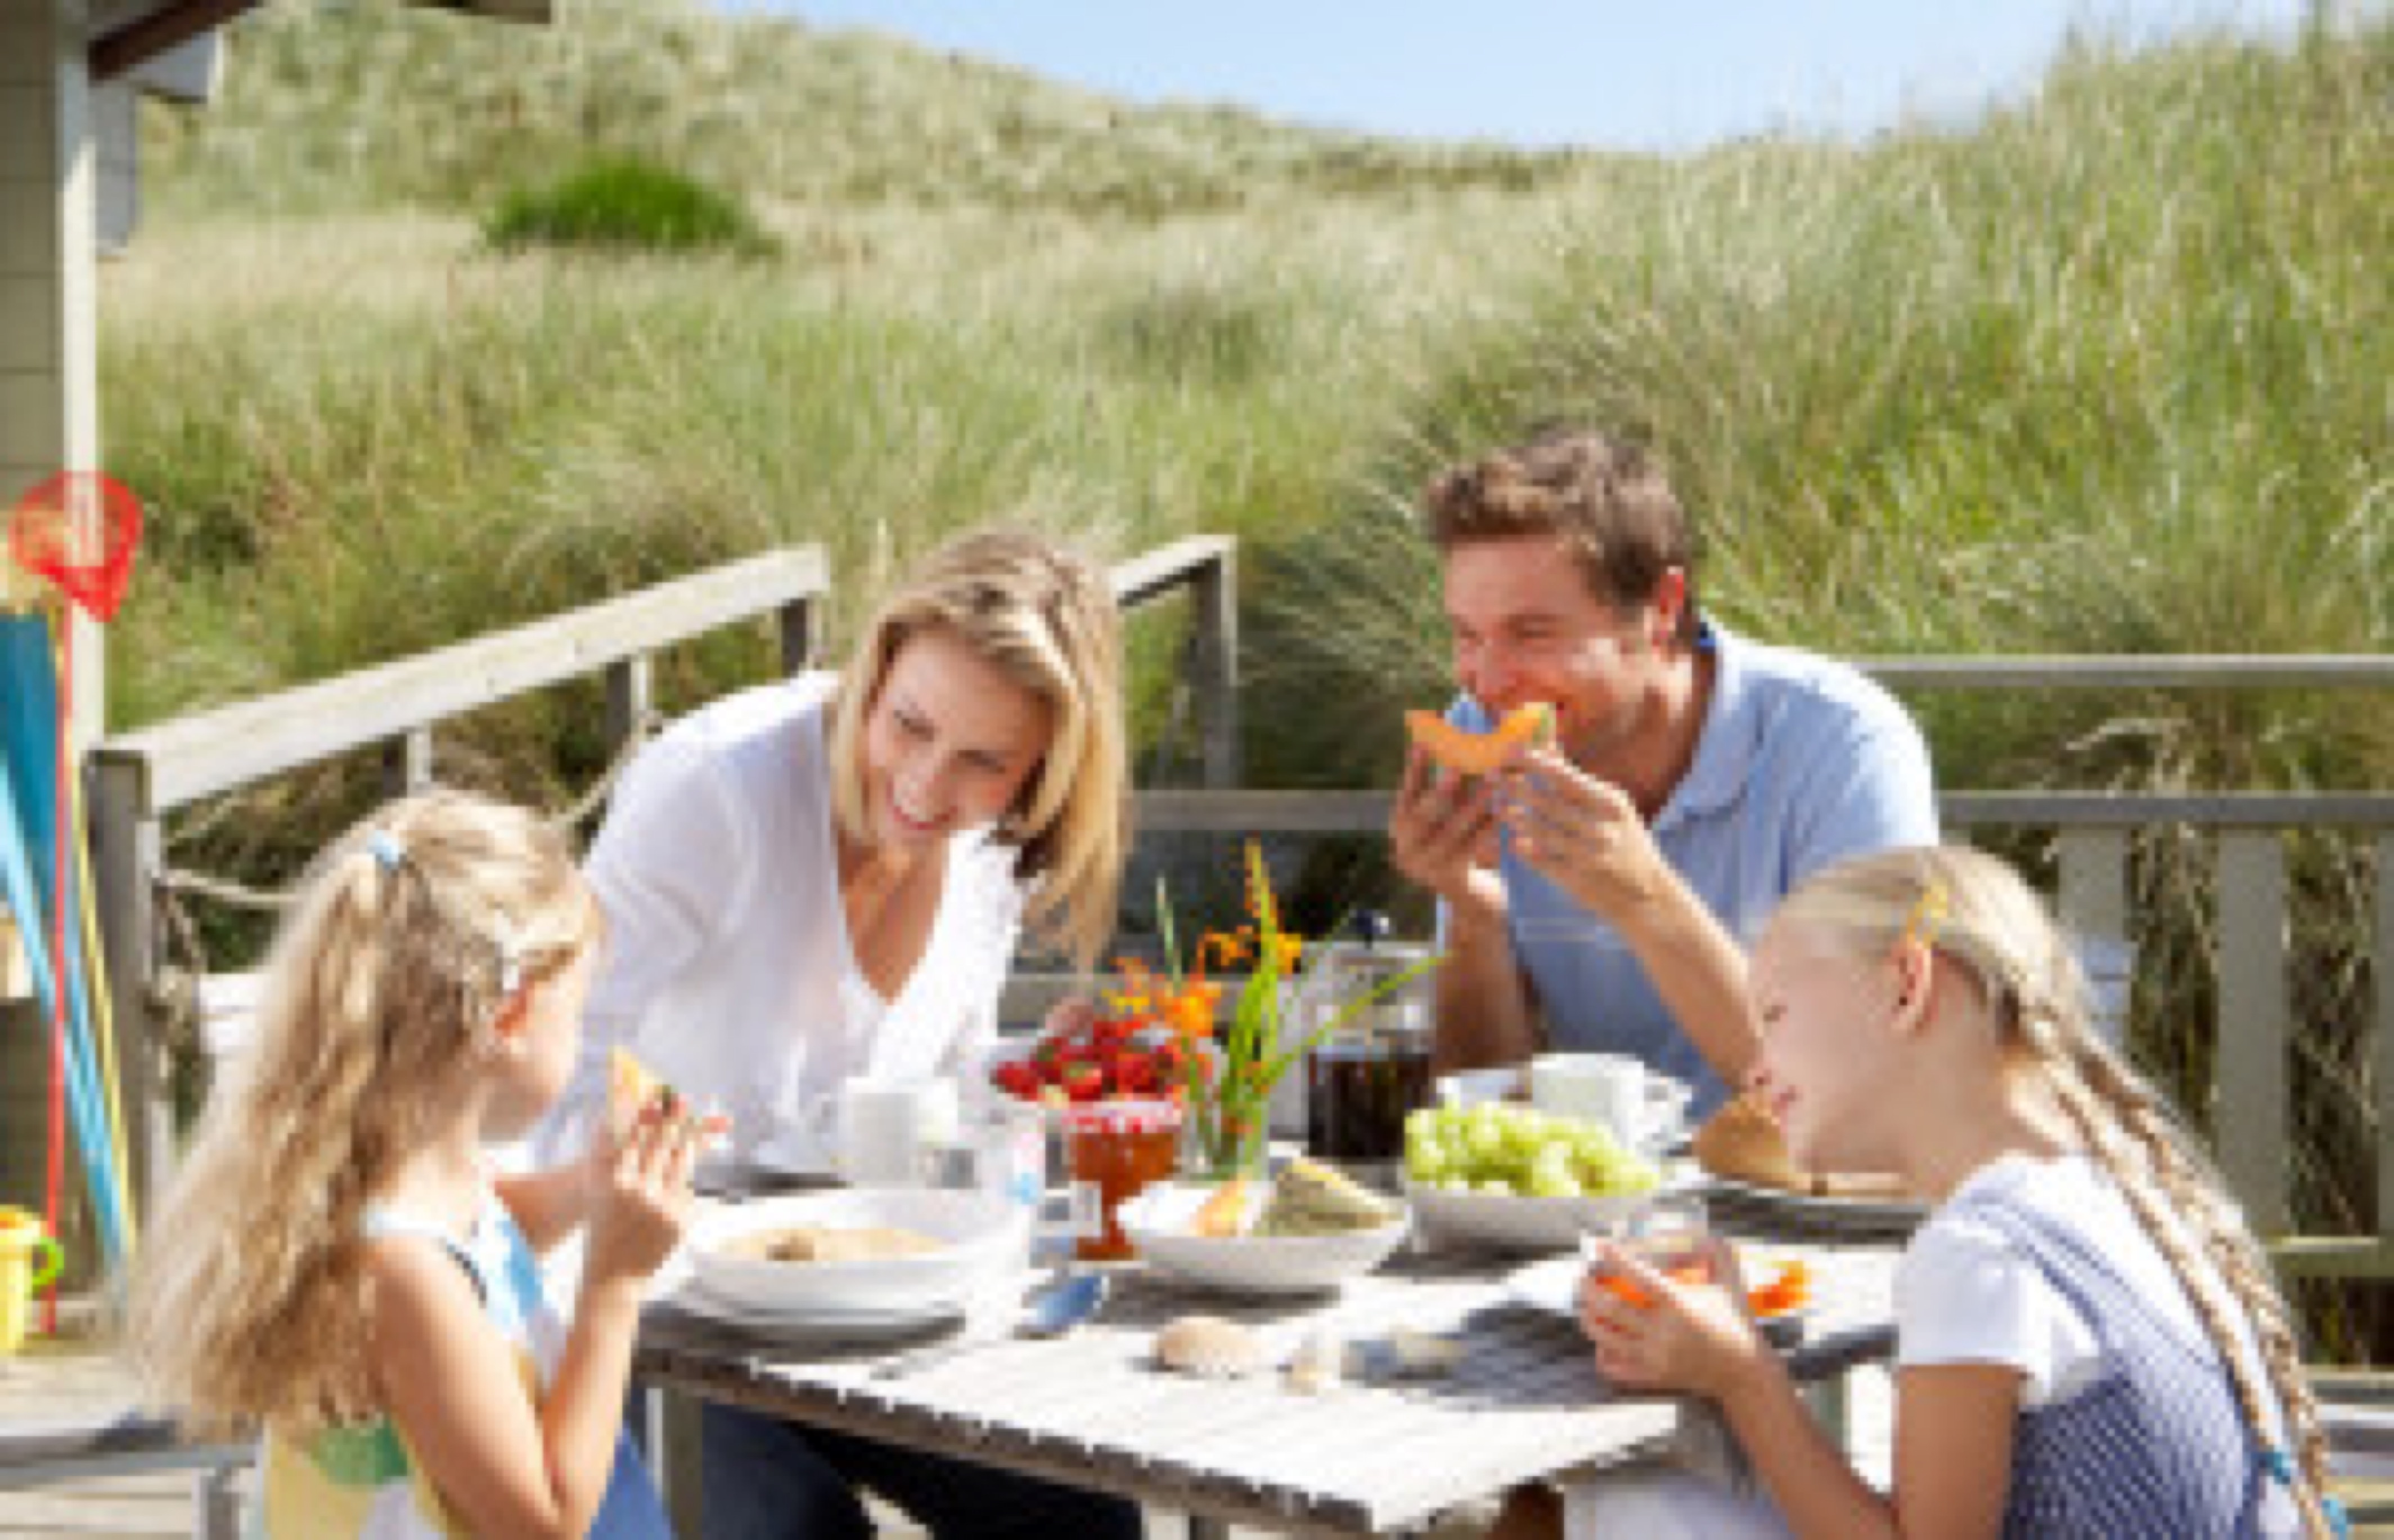 Family on vacation eating outdoors